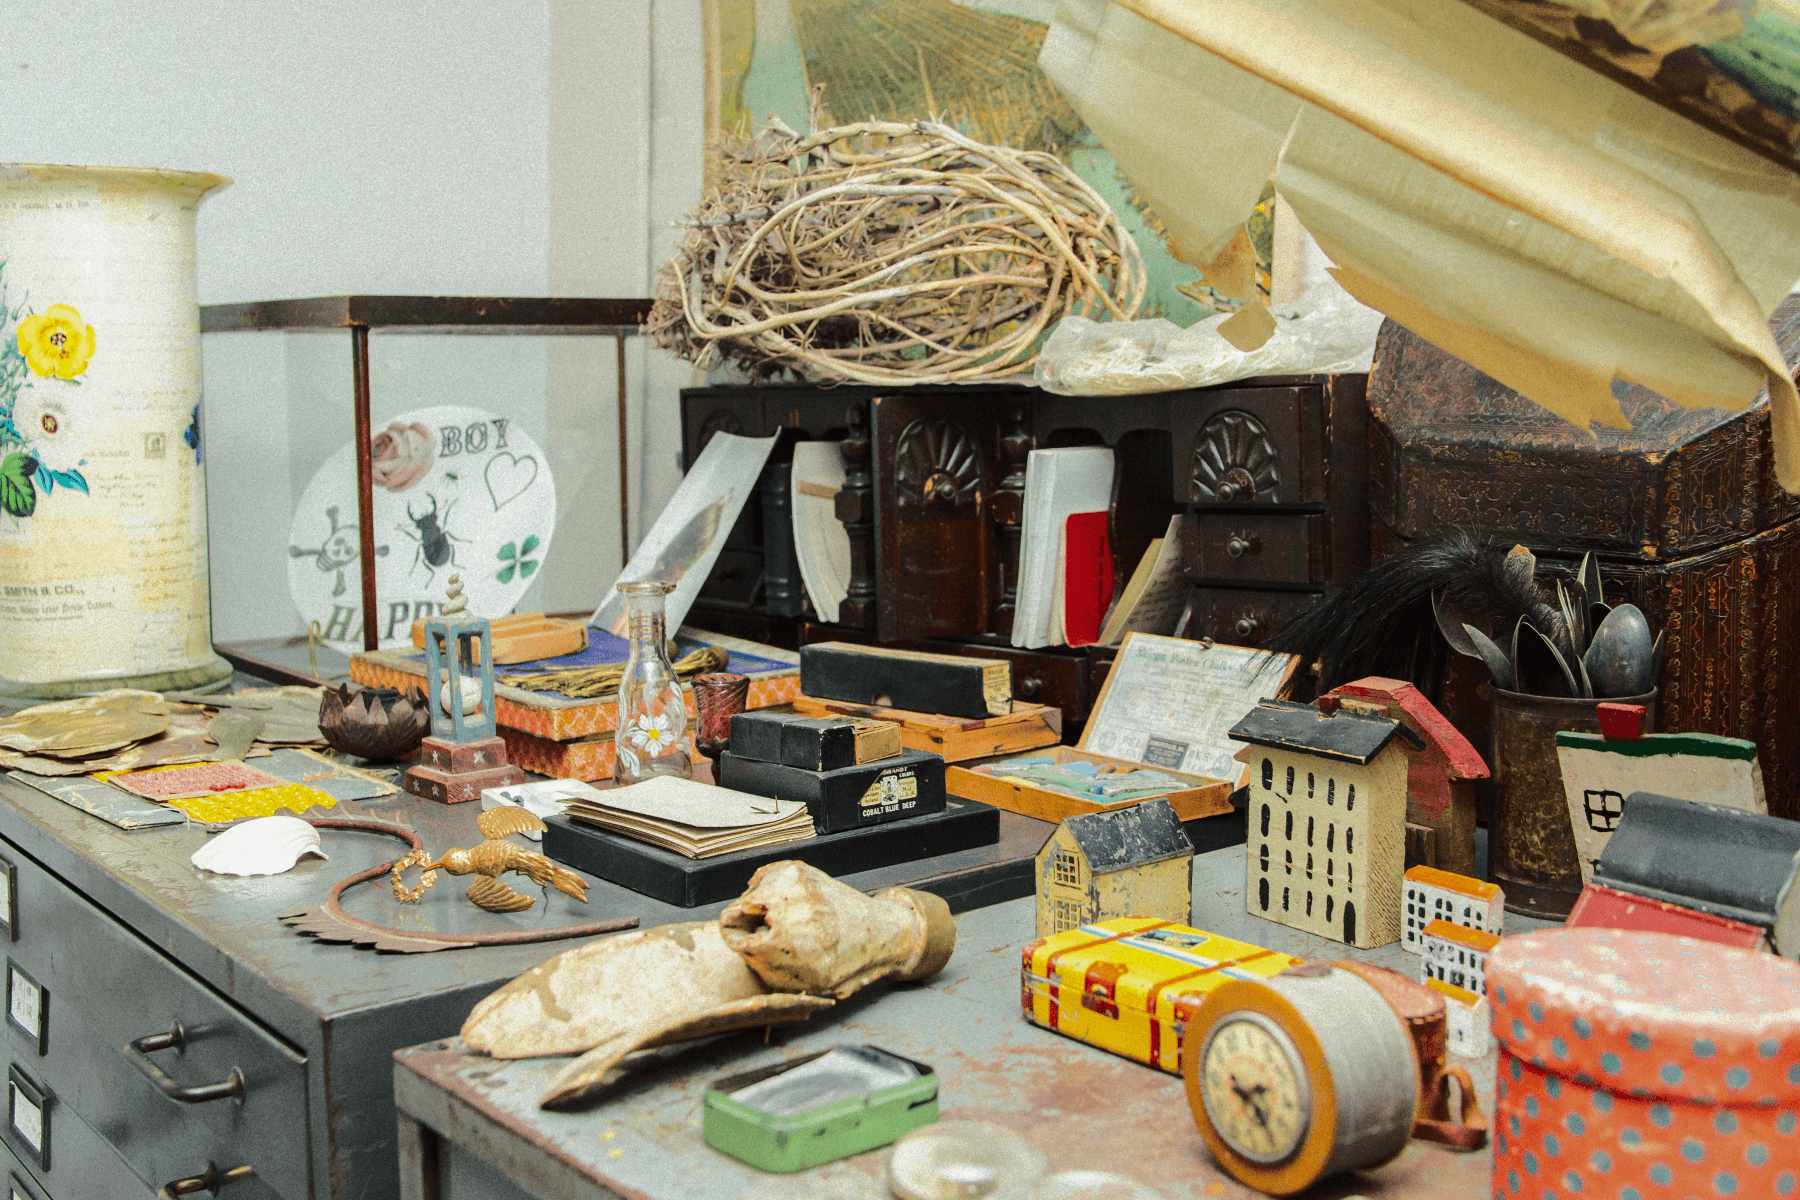 Inside John Derian's studio, a table topped with ephemera and collected items including old boxes, toy houses, and papers .